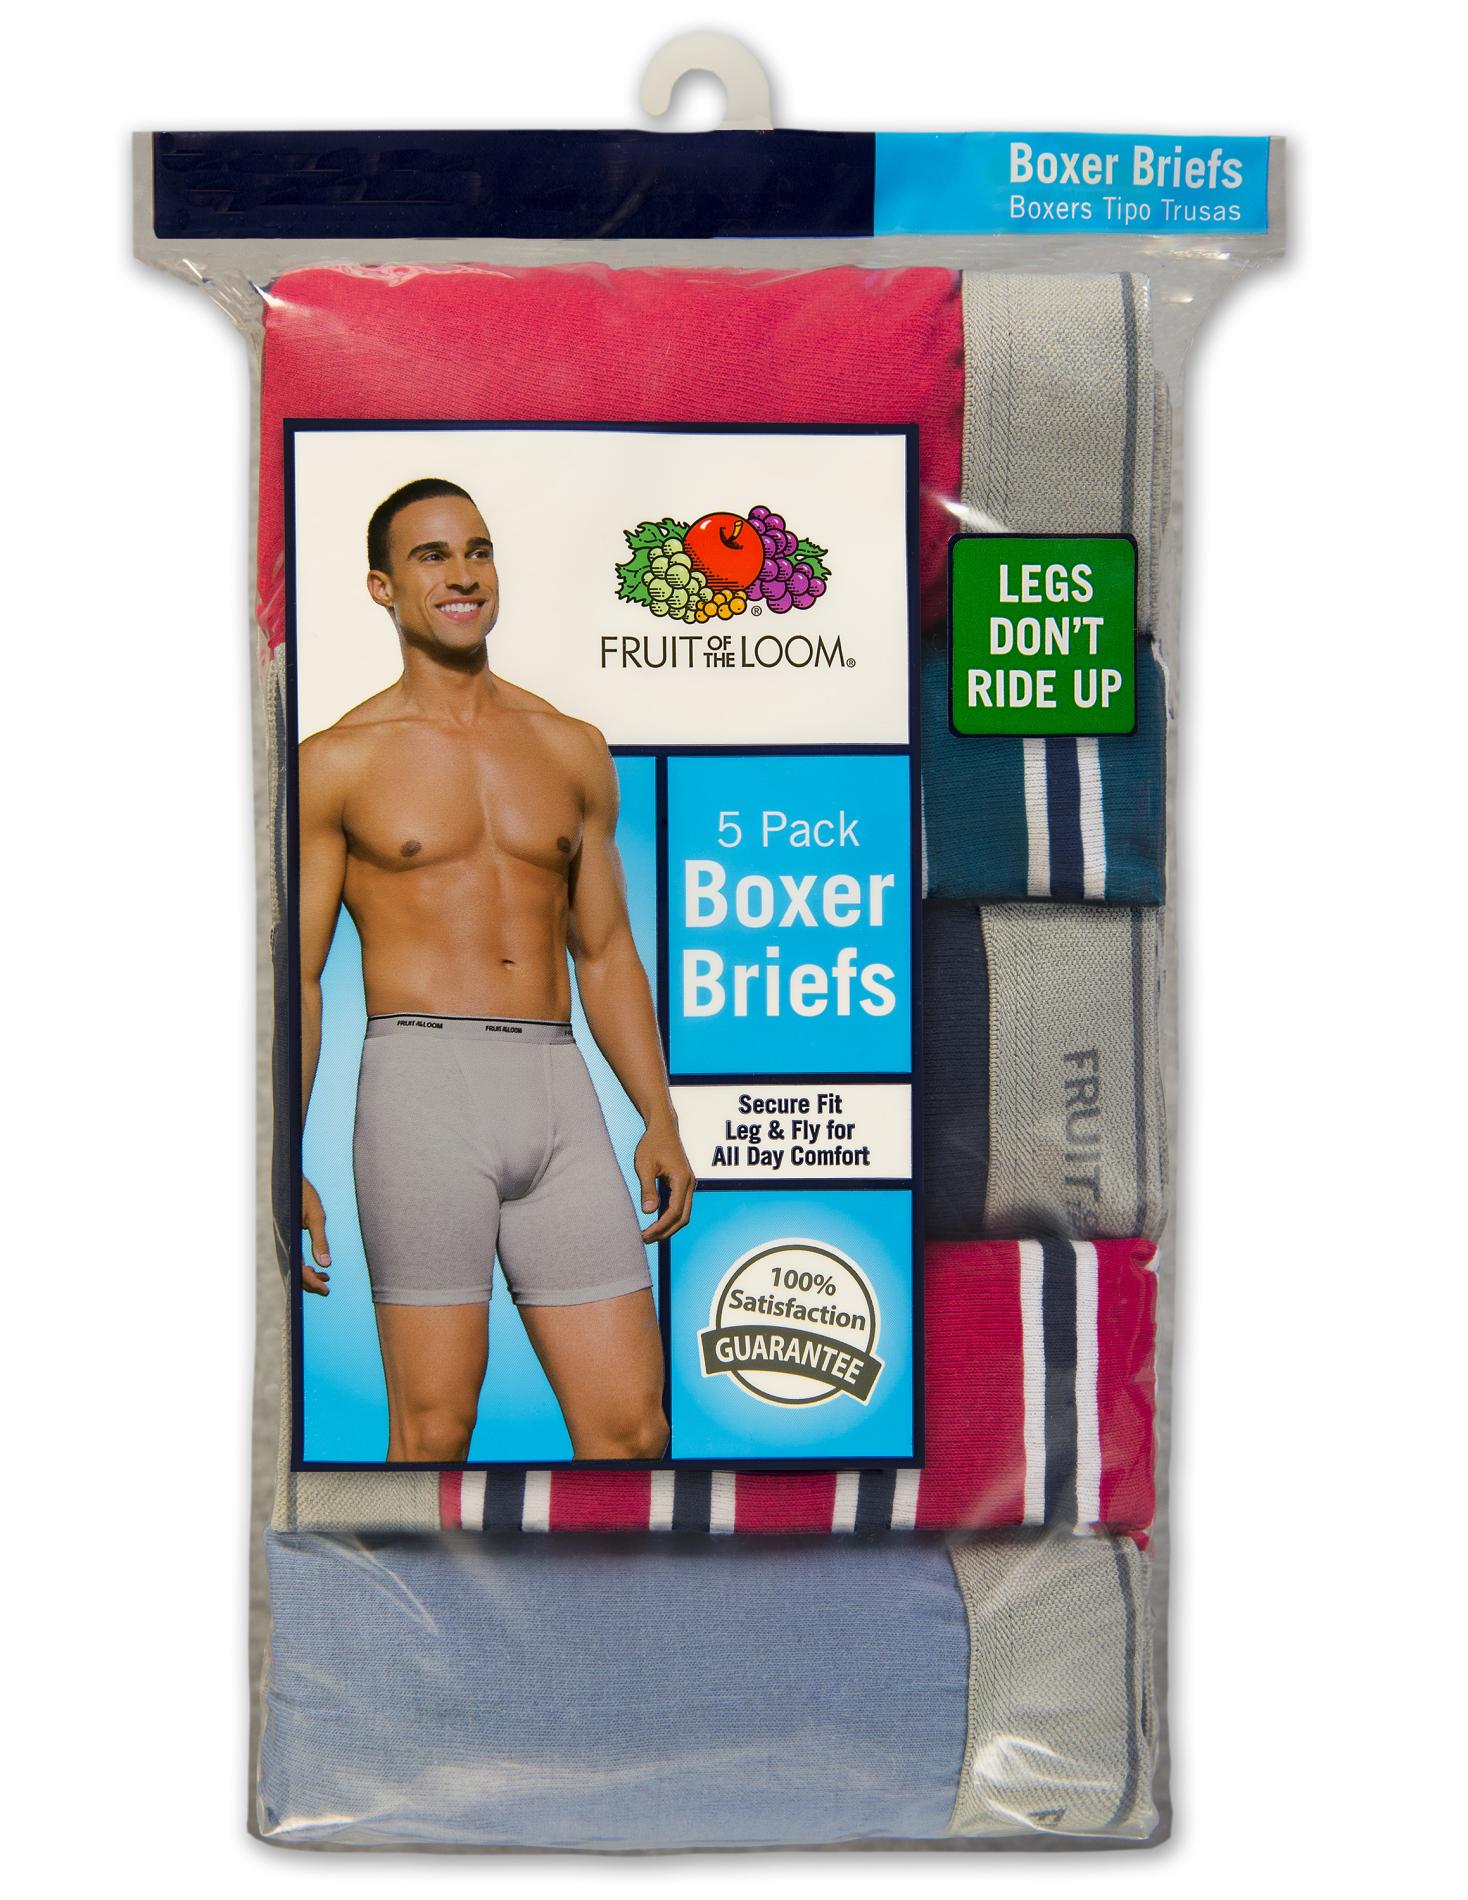 Fruit of the Loom Men's 5-Pack Boxer Briefs - Striped